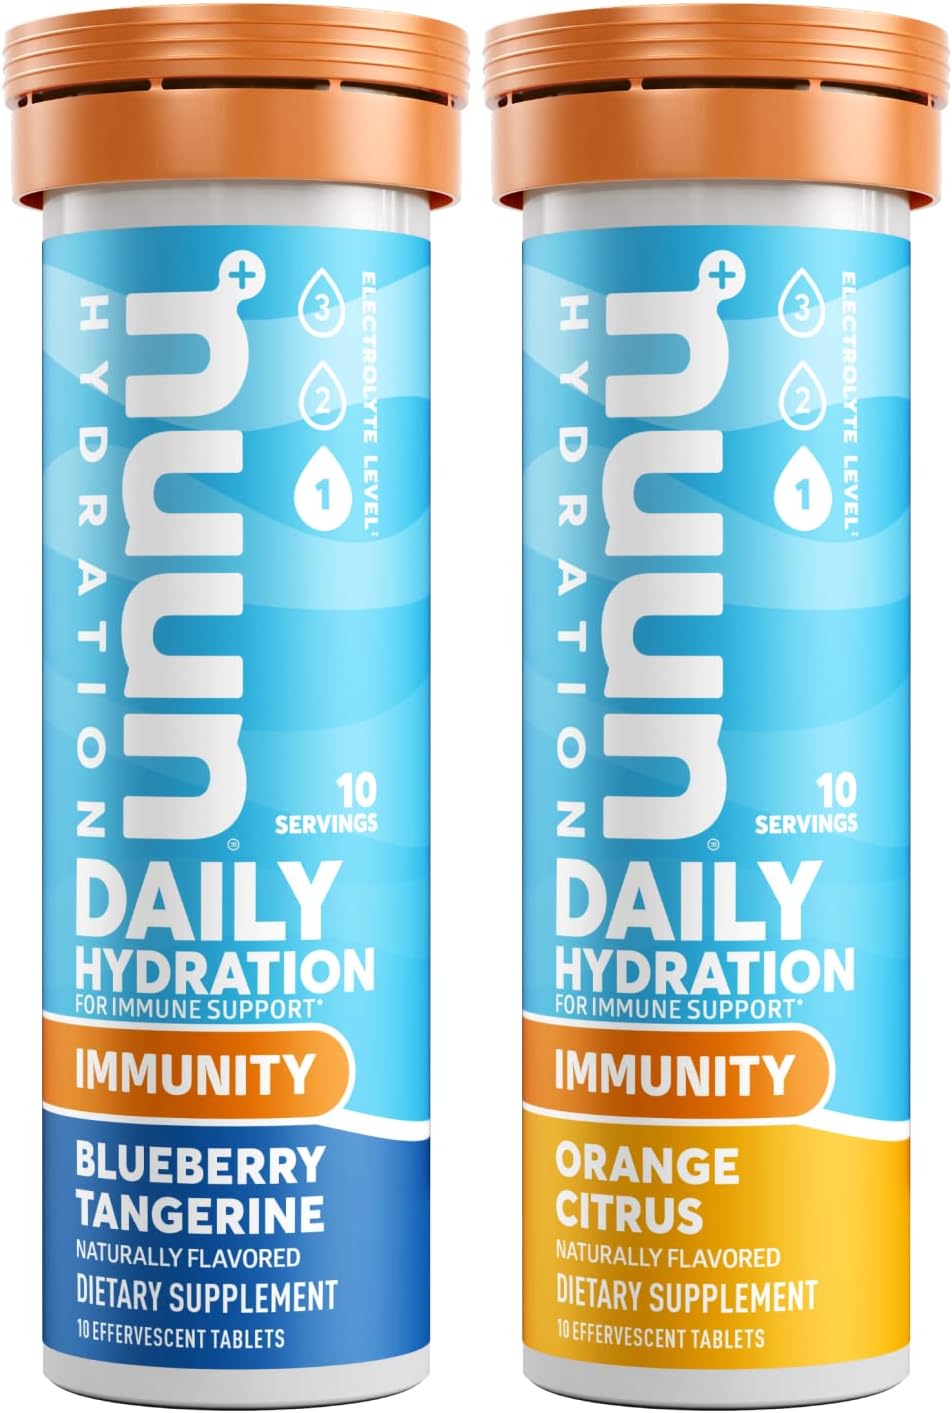 Nuun Hydration Immunity Electrolyte Tablets With 200mg Vitamin C, Blueberry Tangerine and Orange Citrus Flavors, 2 Pack (20 Servings)